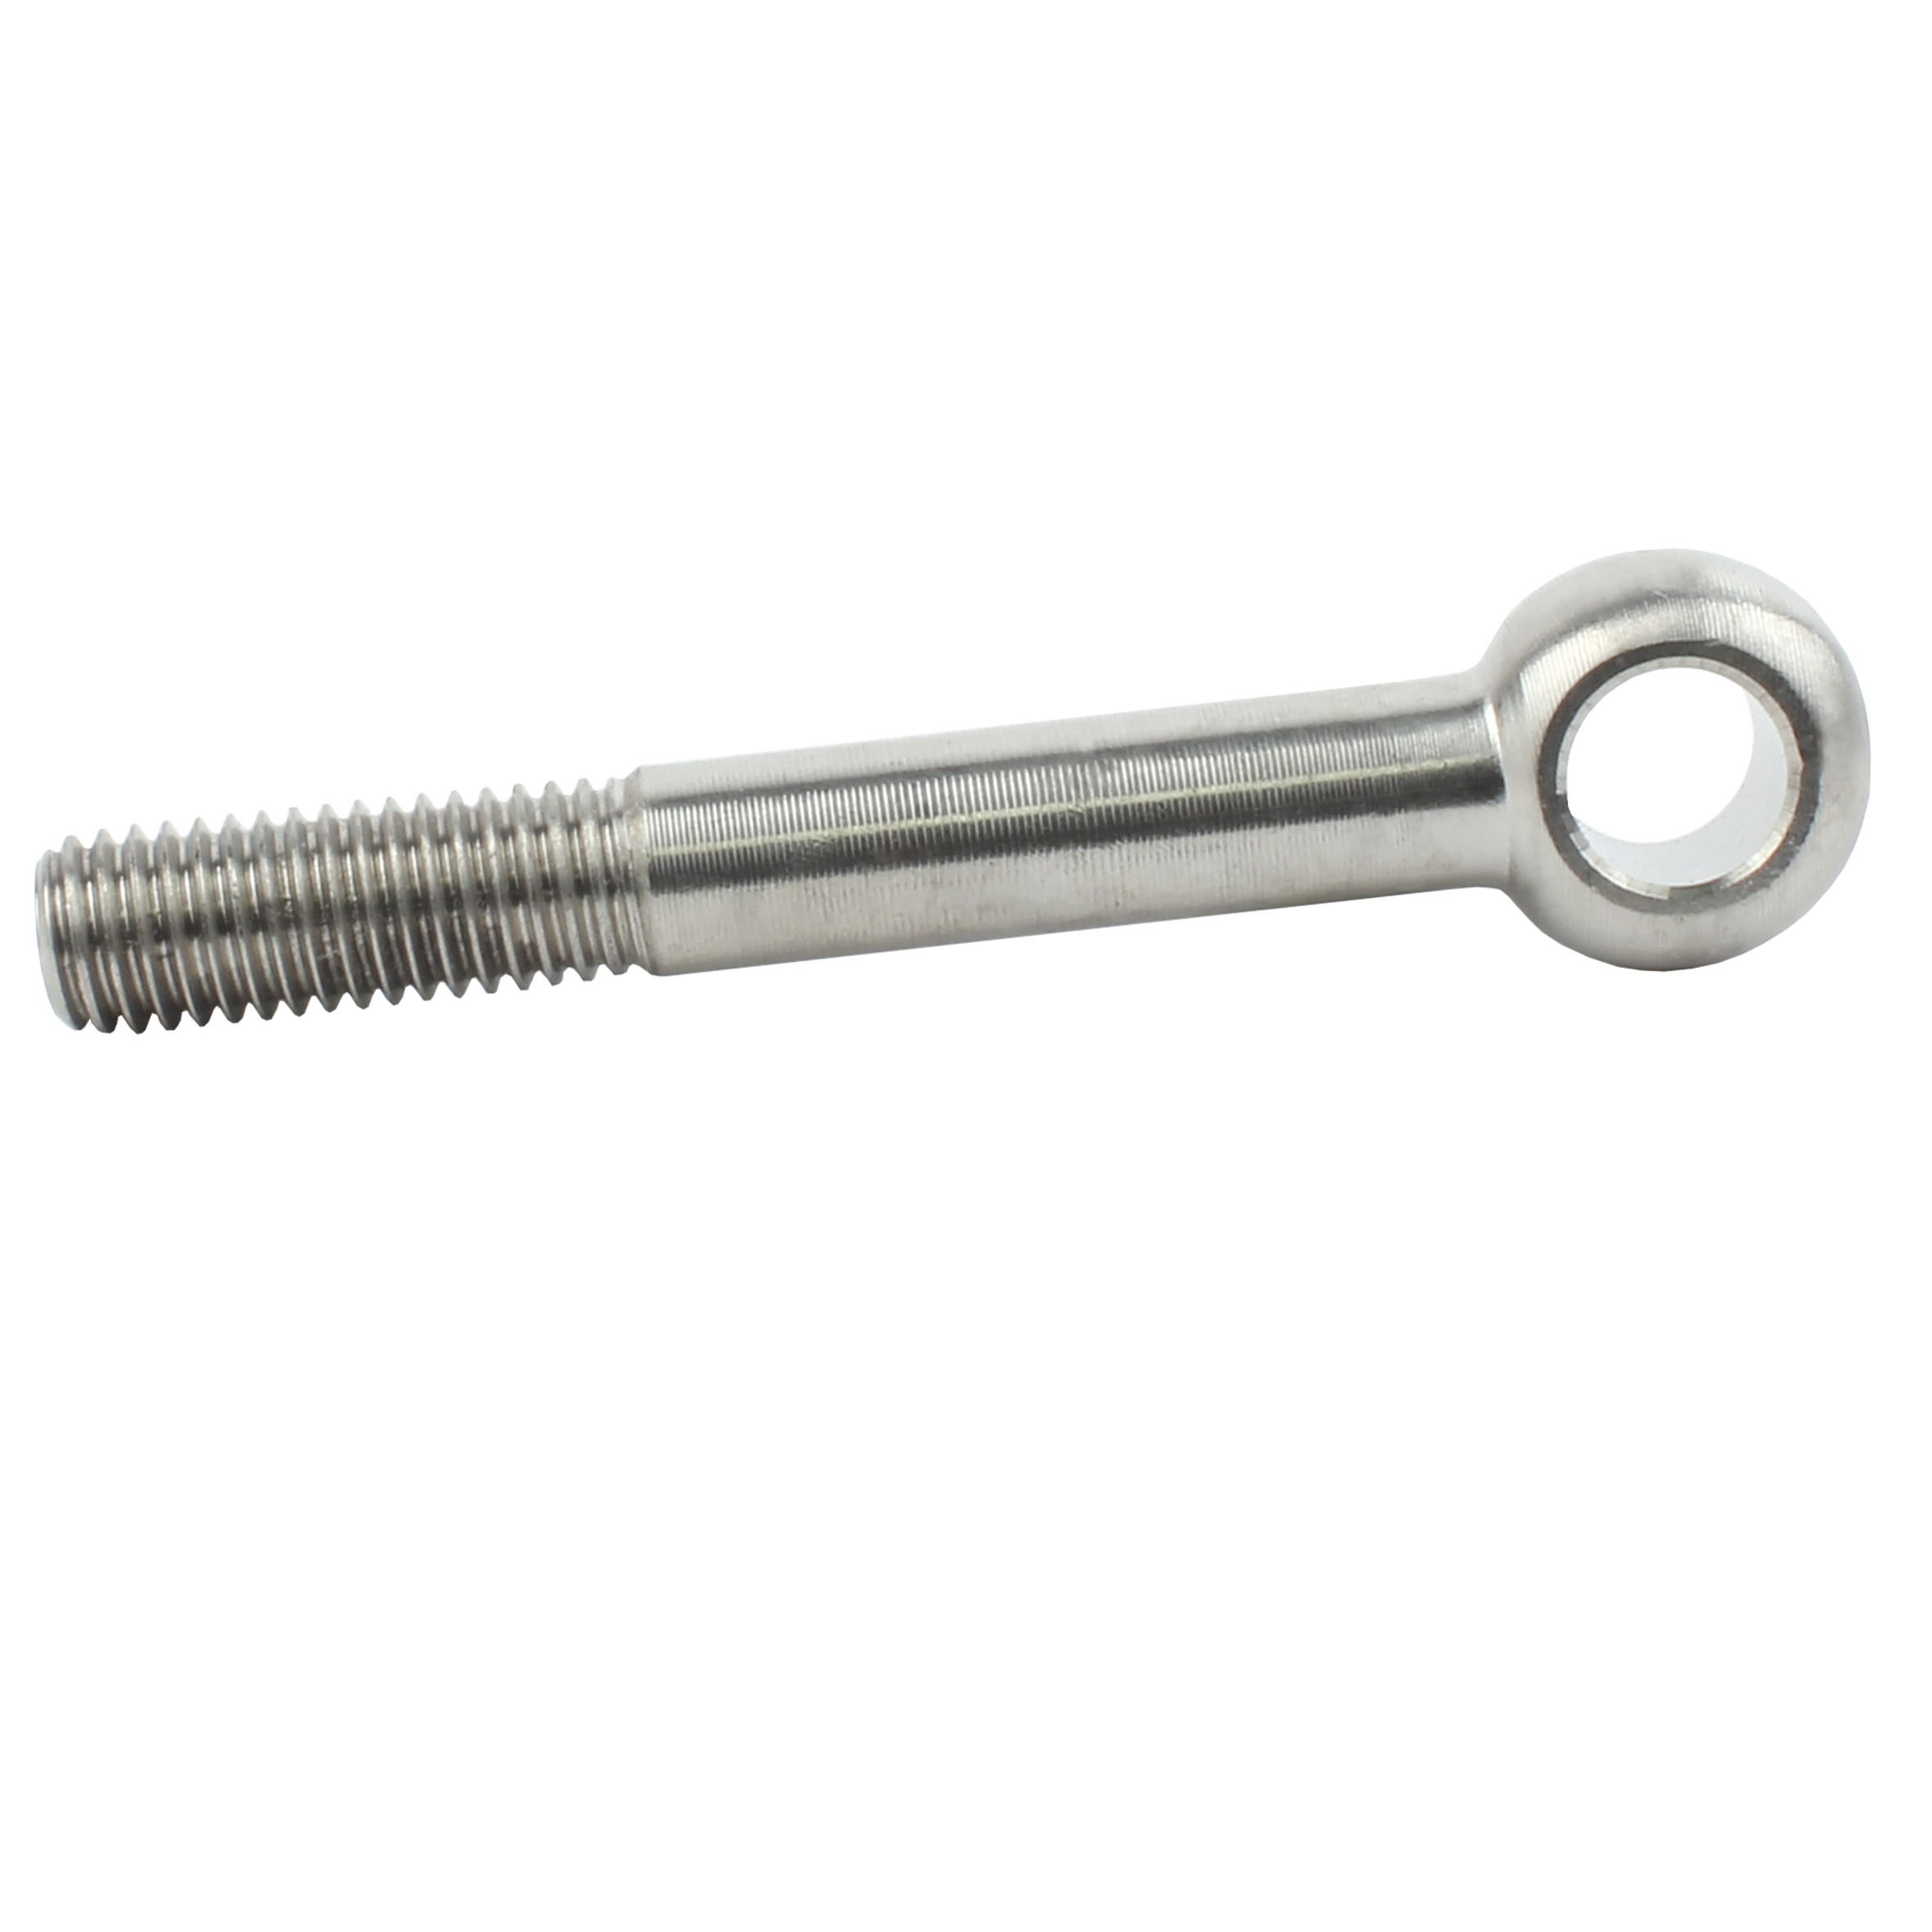 Eye bolt stainless steel - Stainless steel - Male - M5-M16